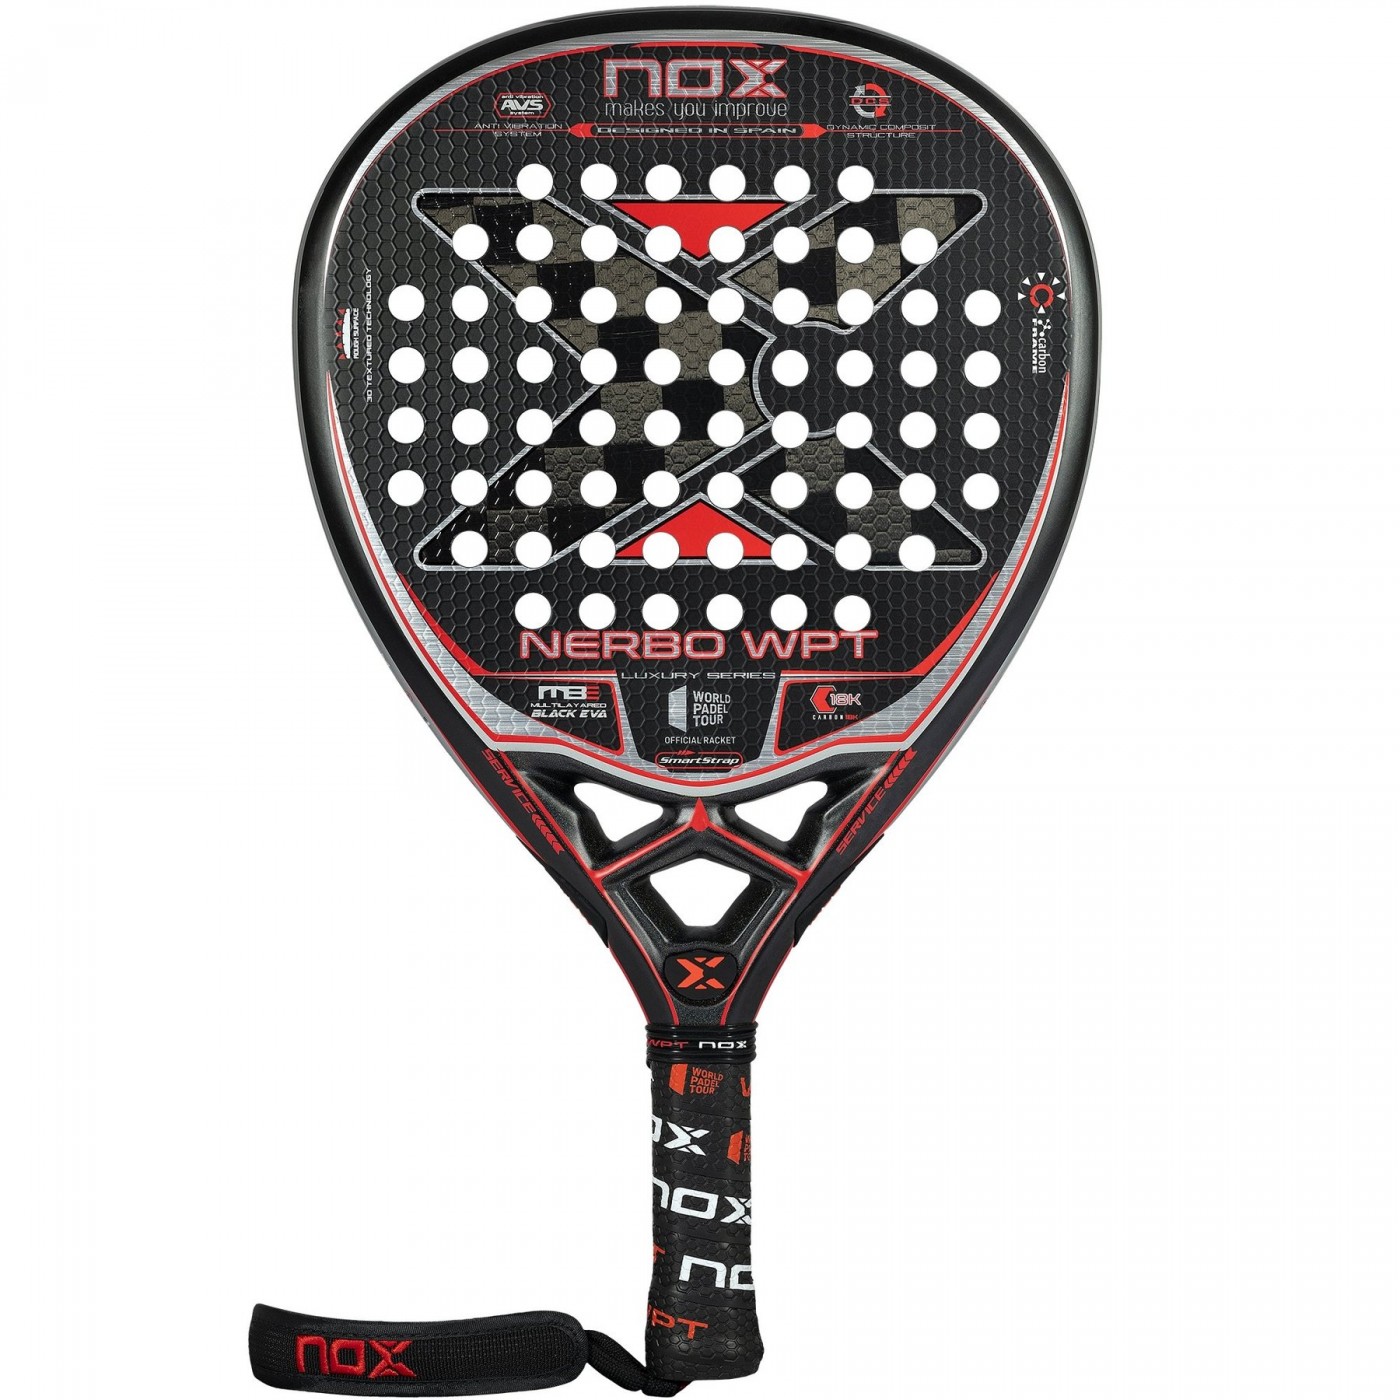 Nerbo World Padel Tour Official Racket 2022 - rojo-gris - 